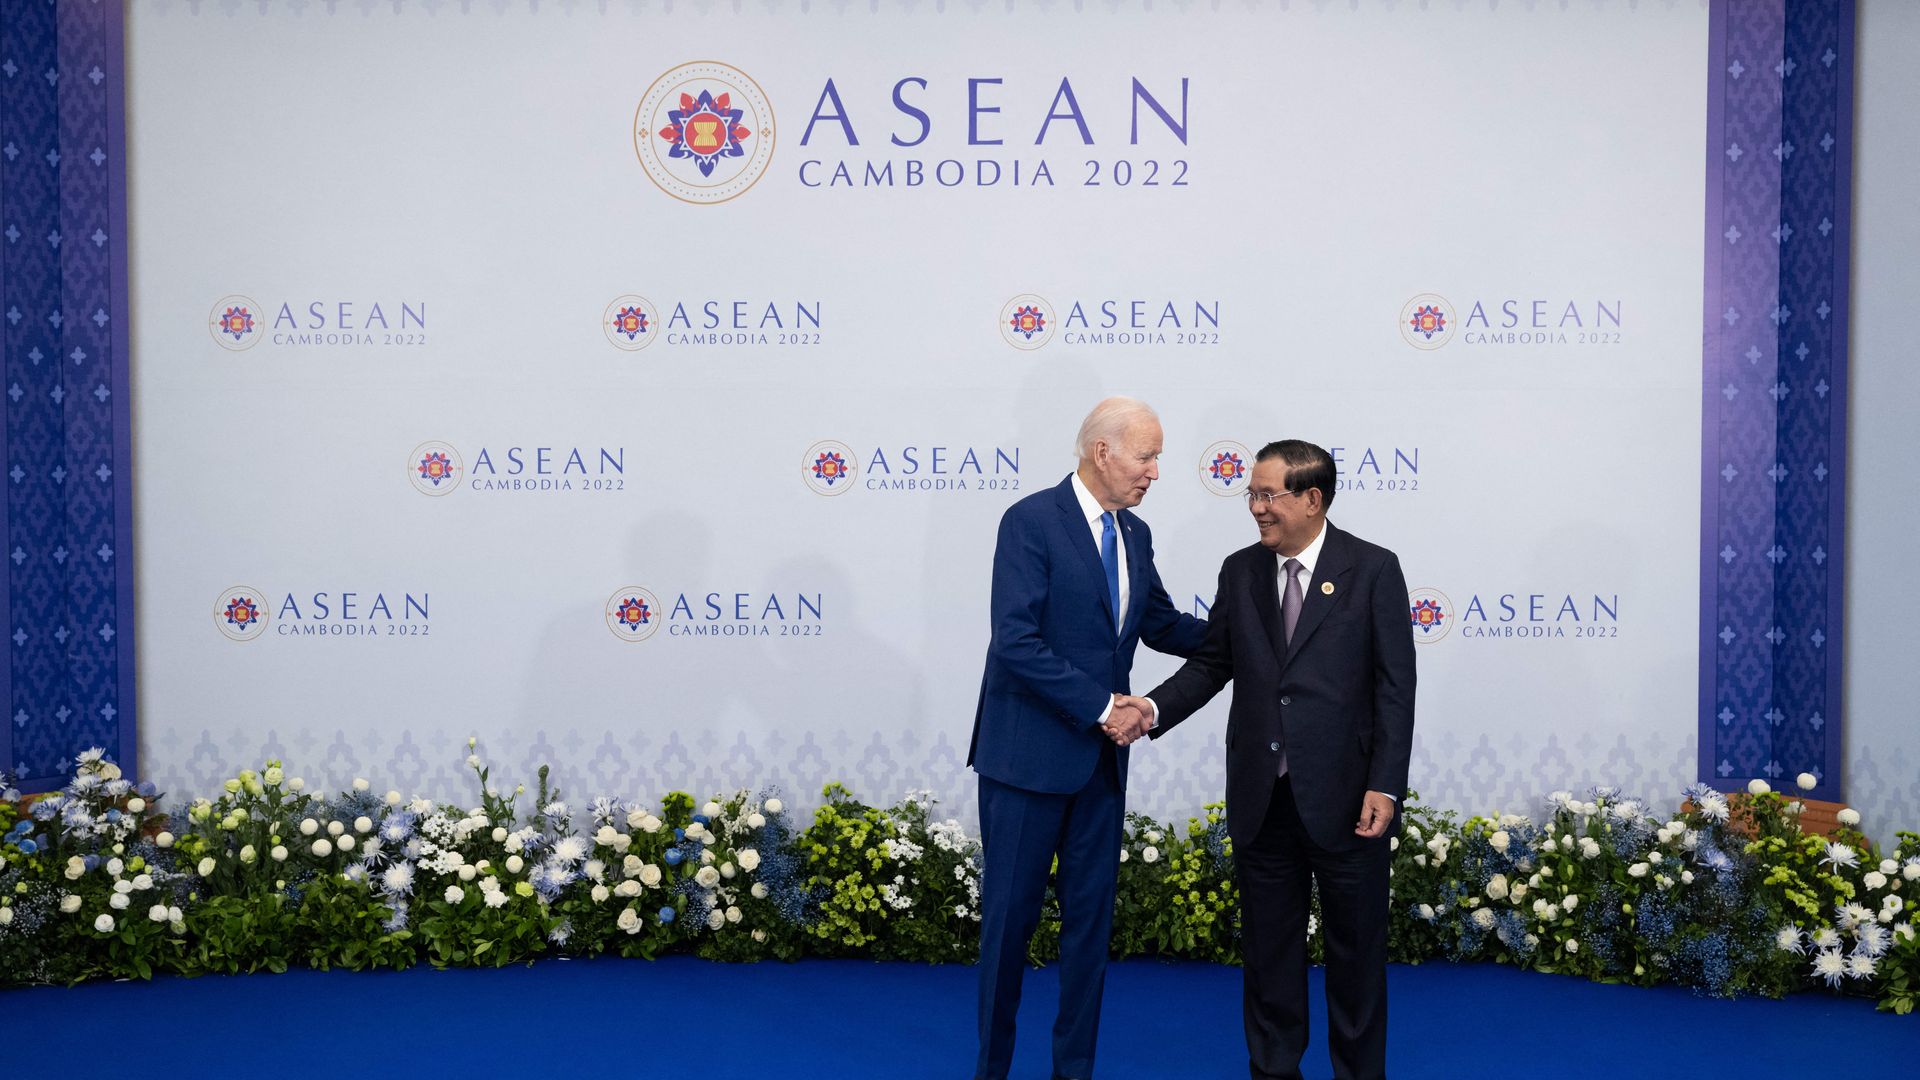 Biden shakes hands with Cambodia's Prime Minister Hun Sen as they meet on the sidelines of the Association of Southeast Asian Nations (ASEAN) Summit in Phnom Penh on November 12, 2022